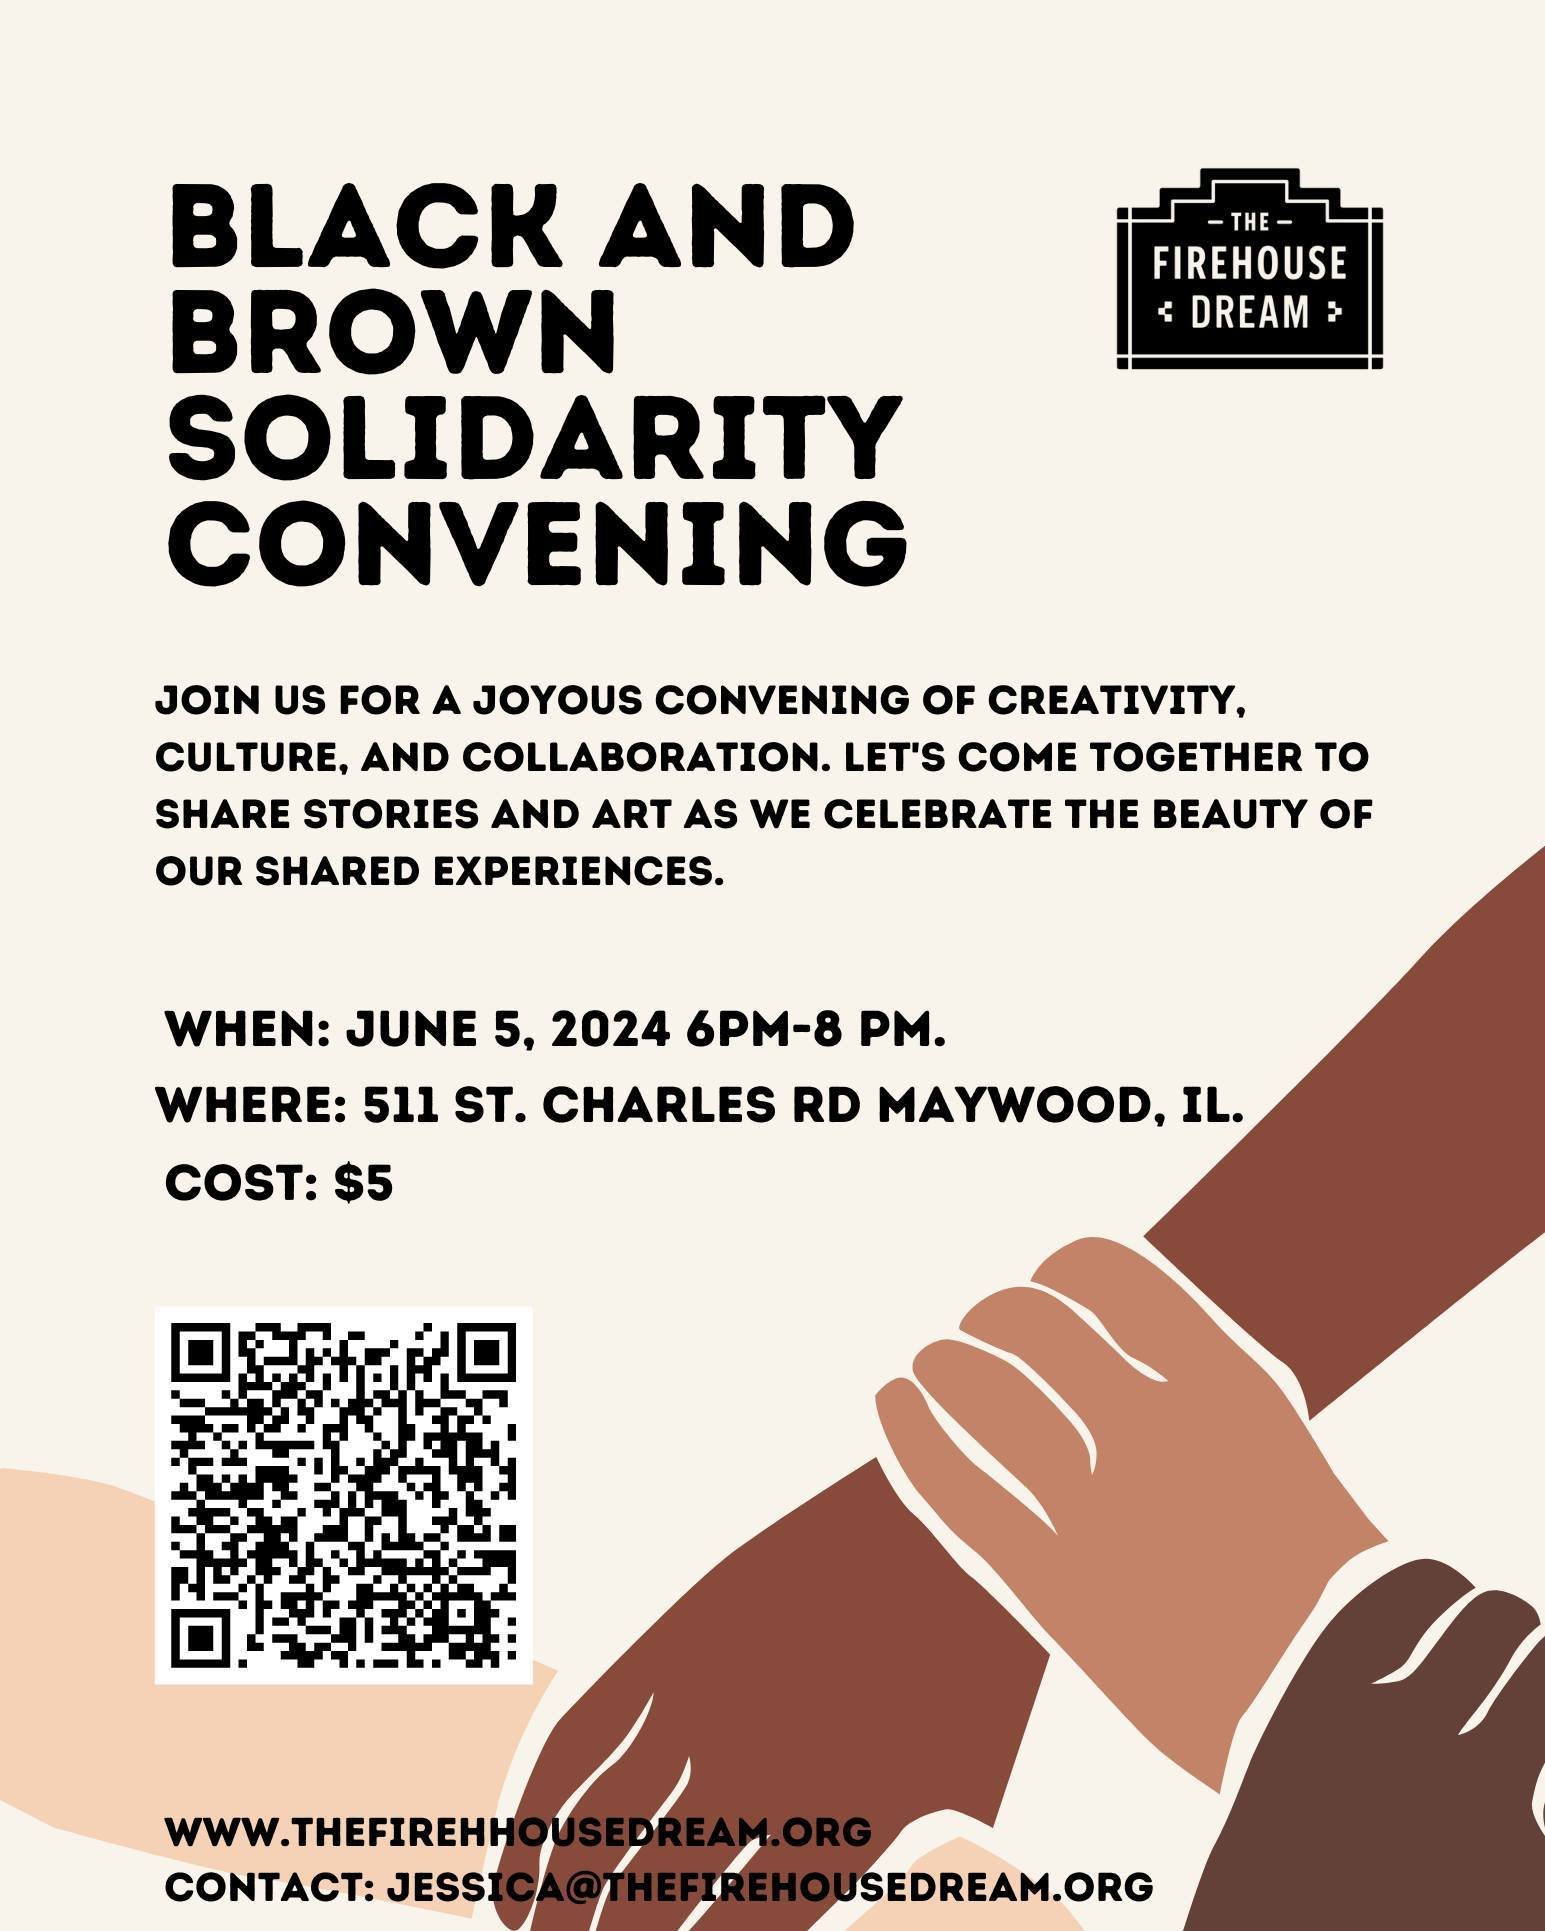 Hey neighbors! We are hosting an art convening on black and brown solidarity as we discuss the intersections of our experiences and strengthen our bonds as communities of color. Spread the word and bring your energy as we embark on this journey of so